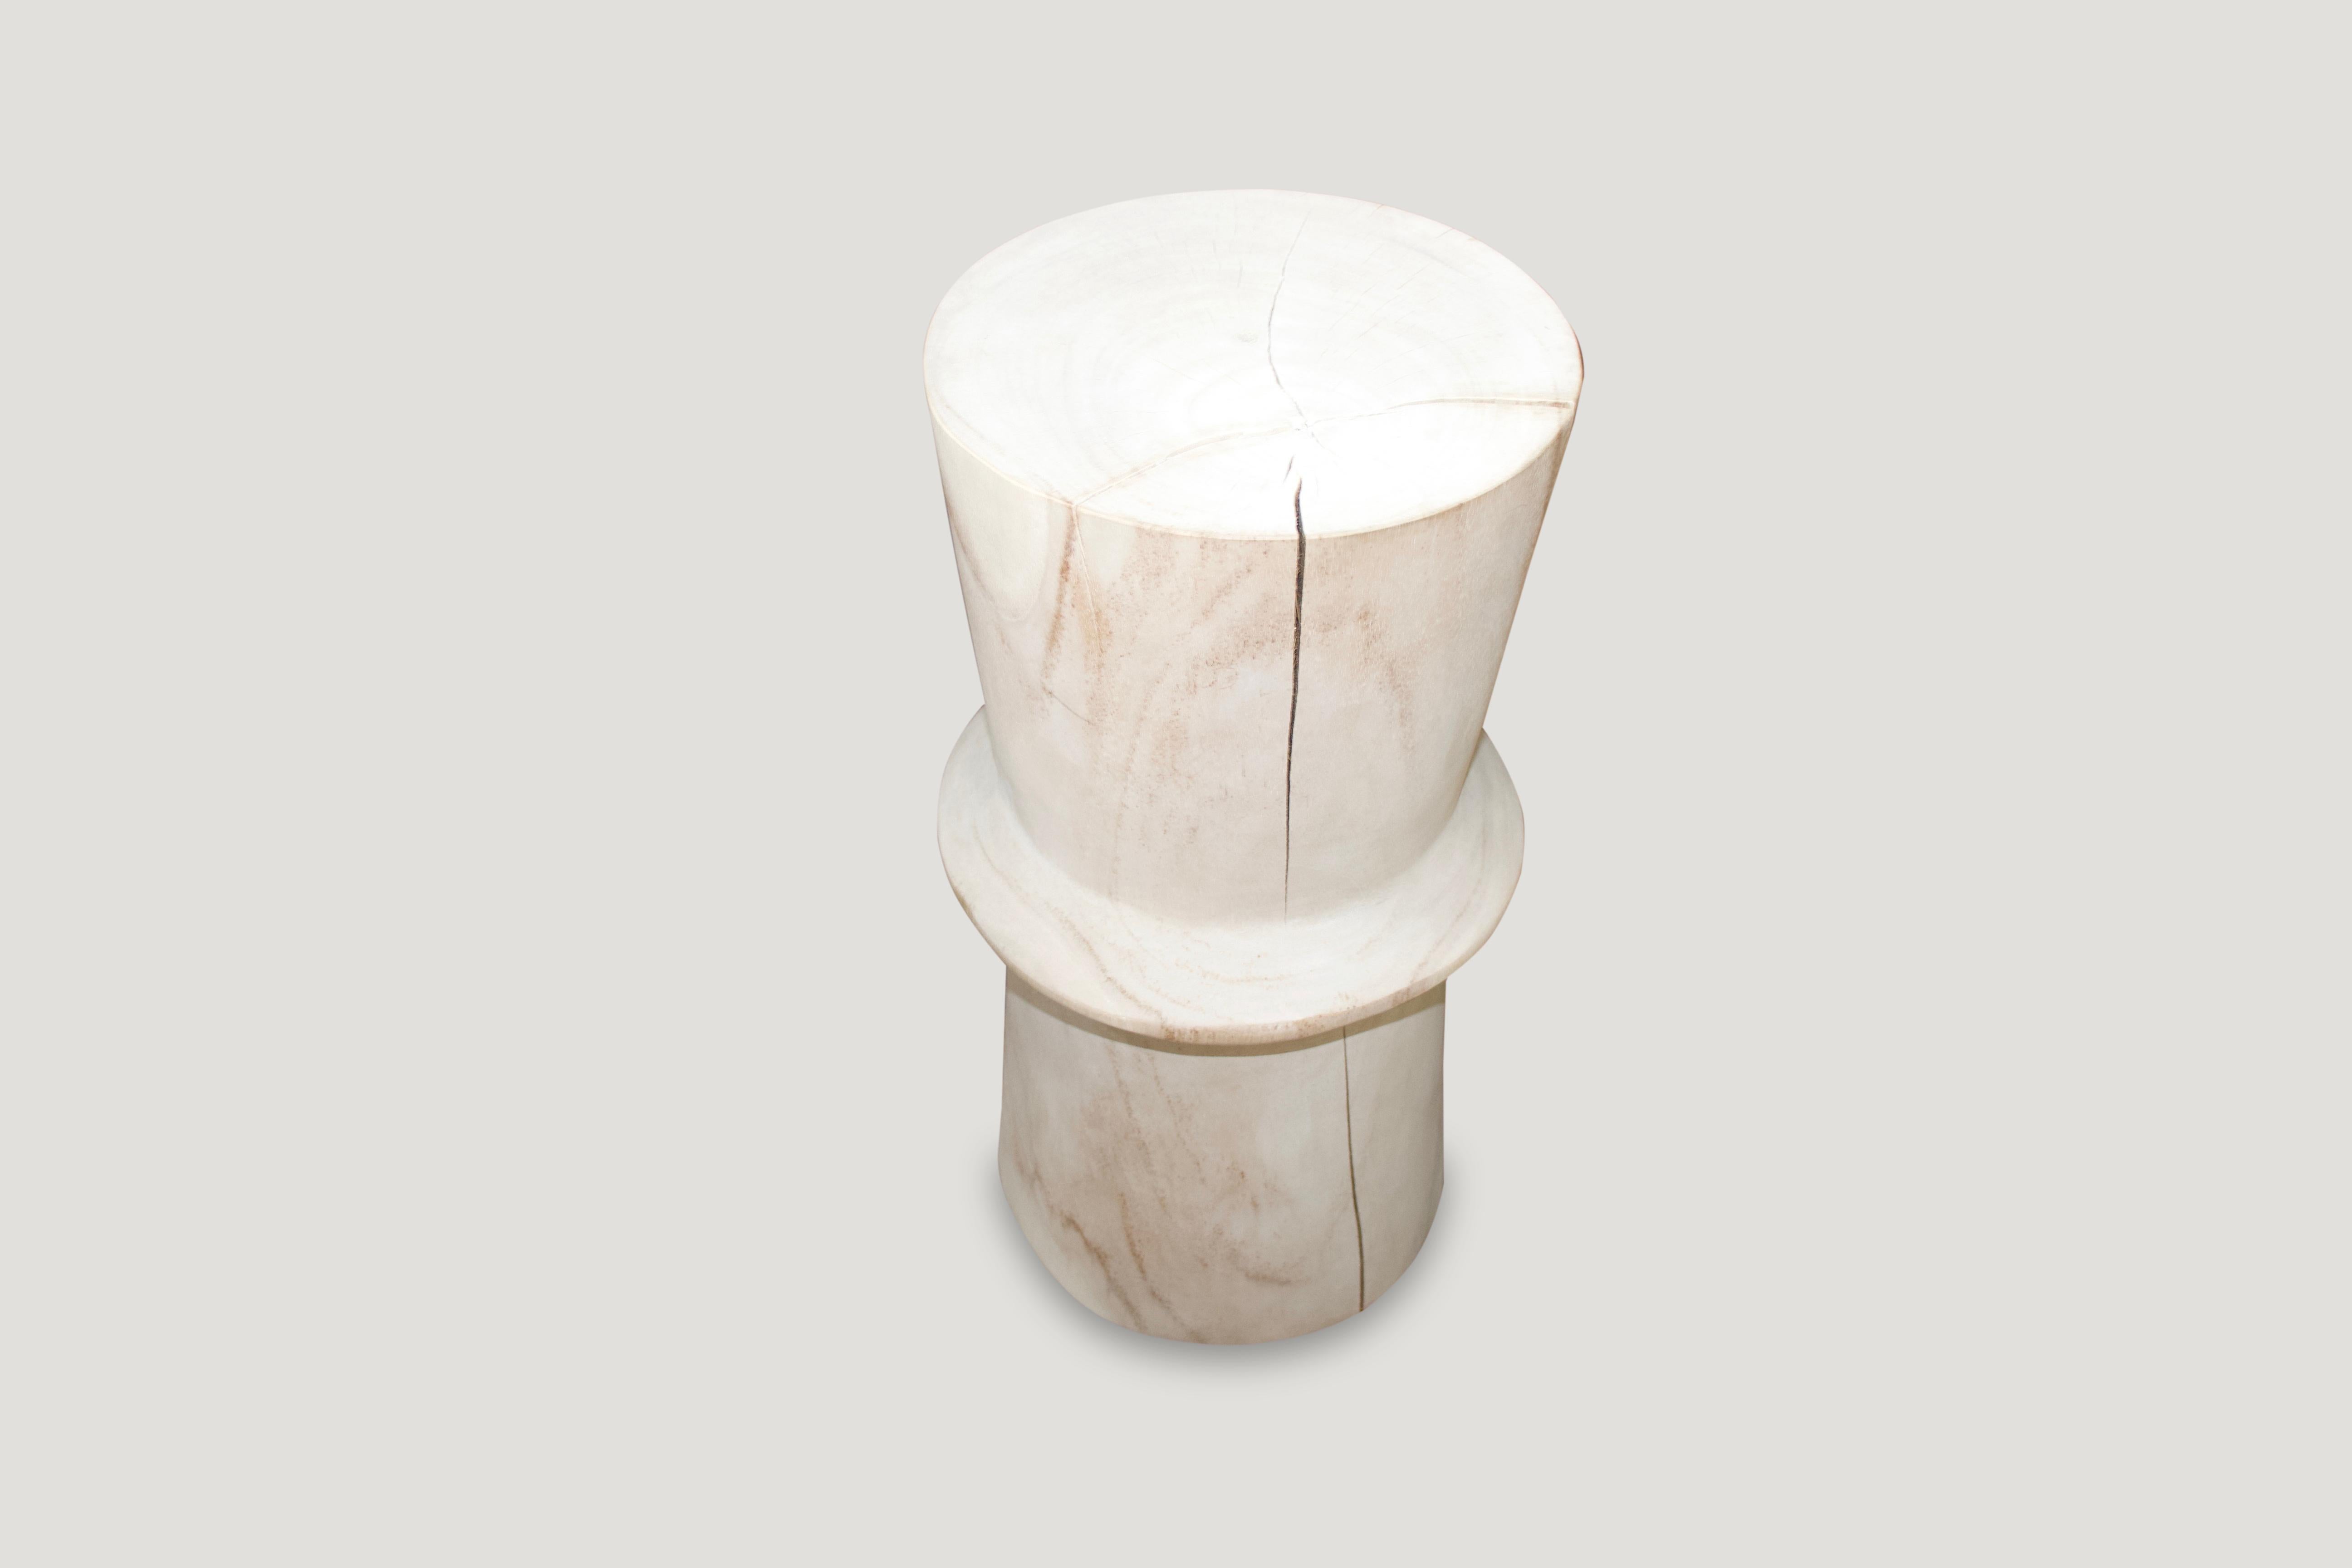 Hand carved, reclaimed teak wood side table or stool. The price reflects one.

The St. Barts Collection features an exciting new line of organic white wash and natural weathered teak furniture. The reclaimed teak is bleached and left to bake in the